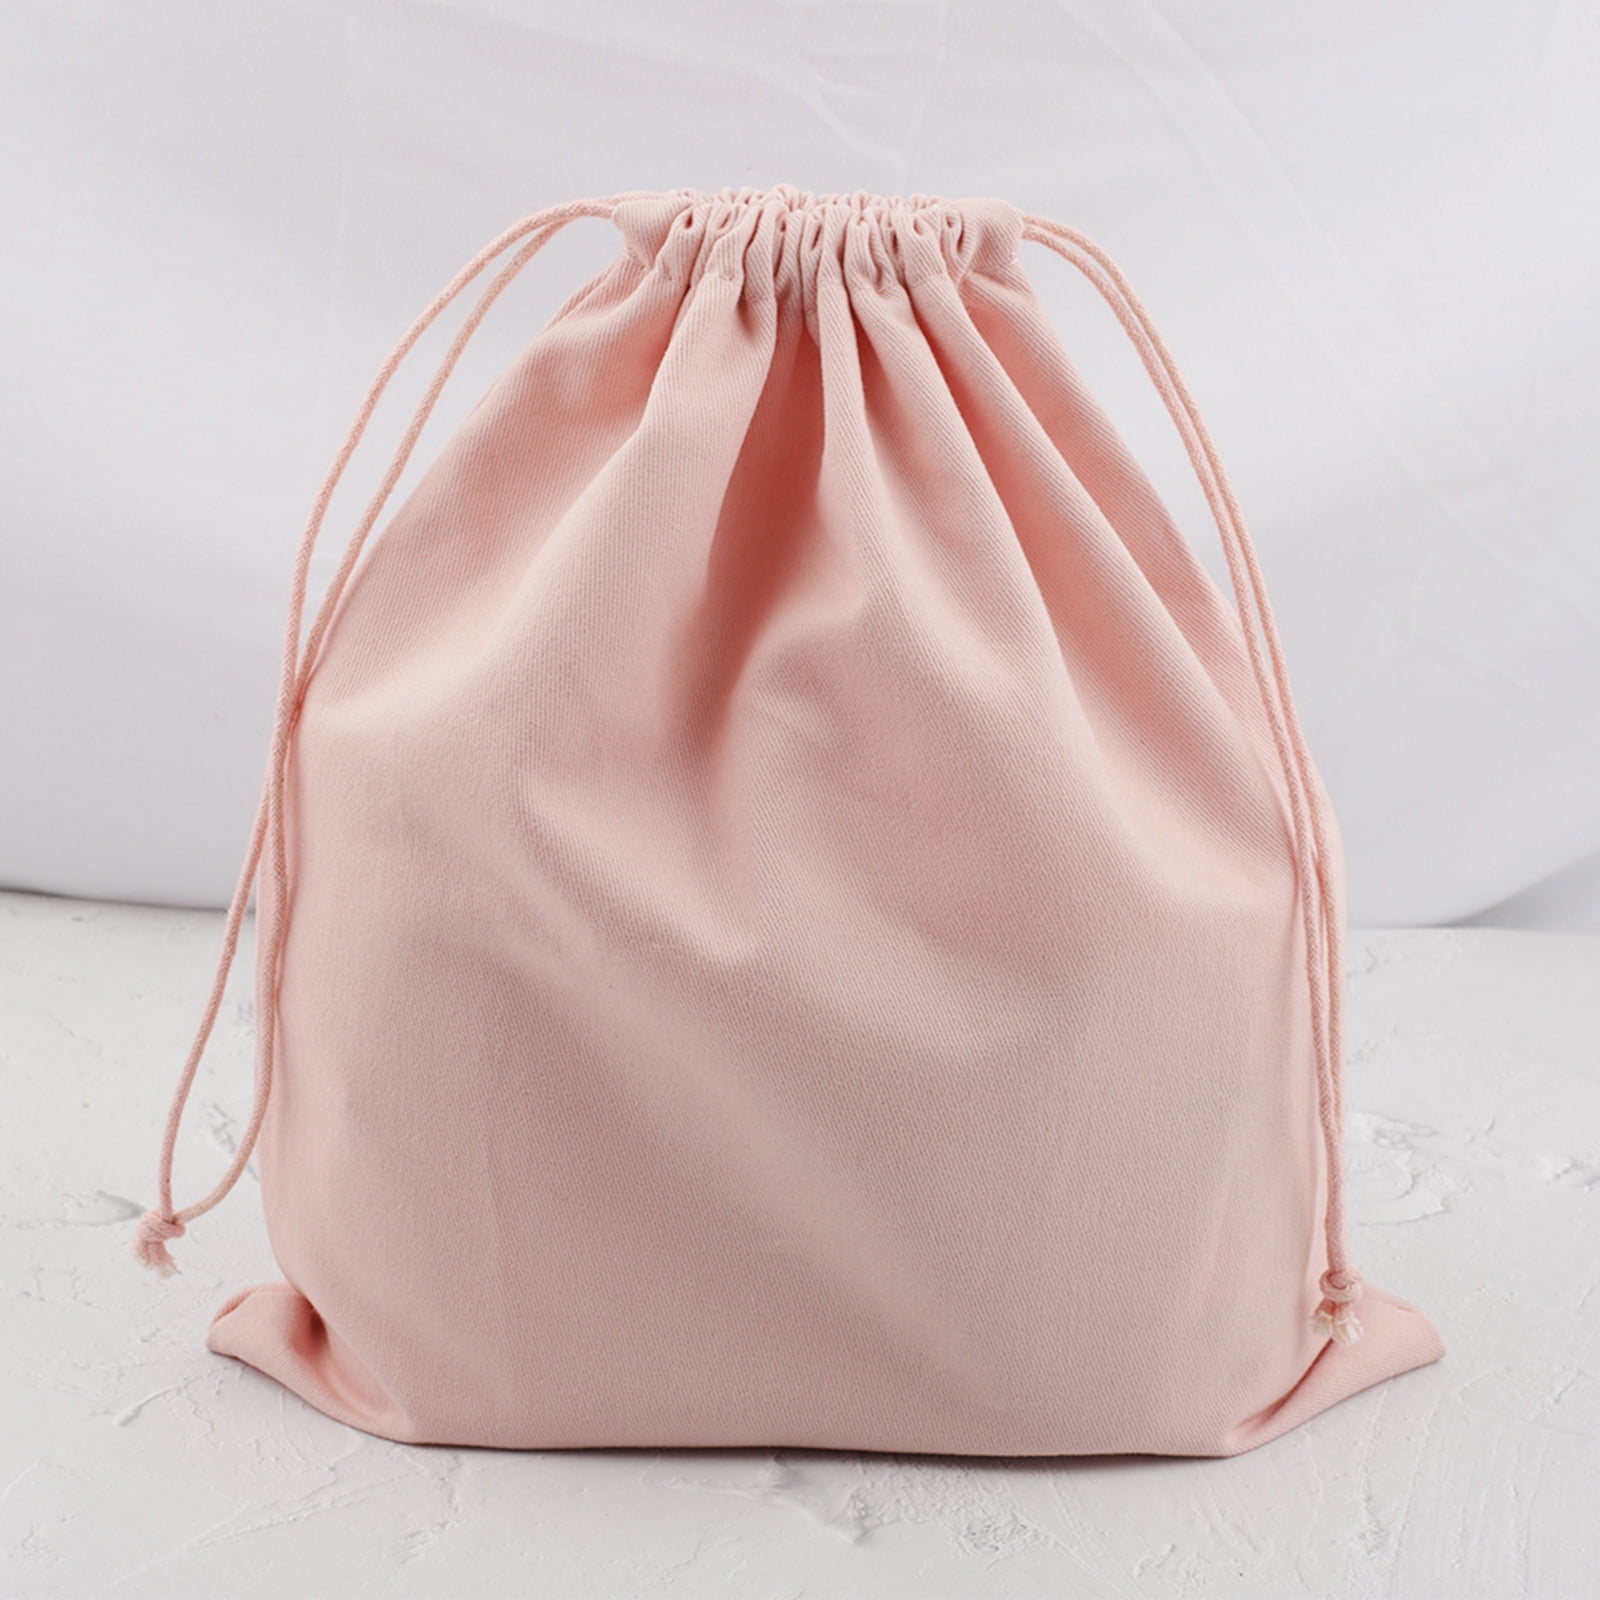 Set of 10/20/30/50 Satin Dust Bags Drawstring Pouch for Handbags